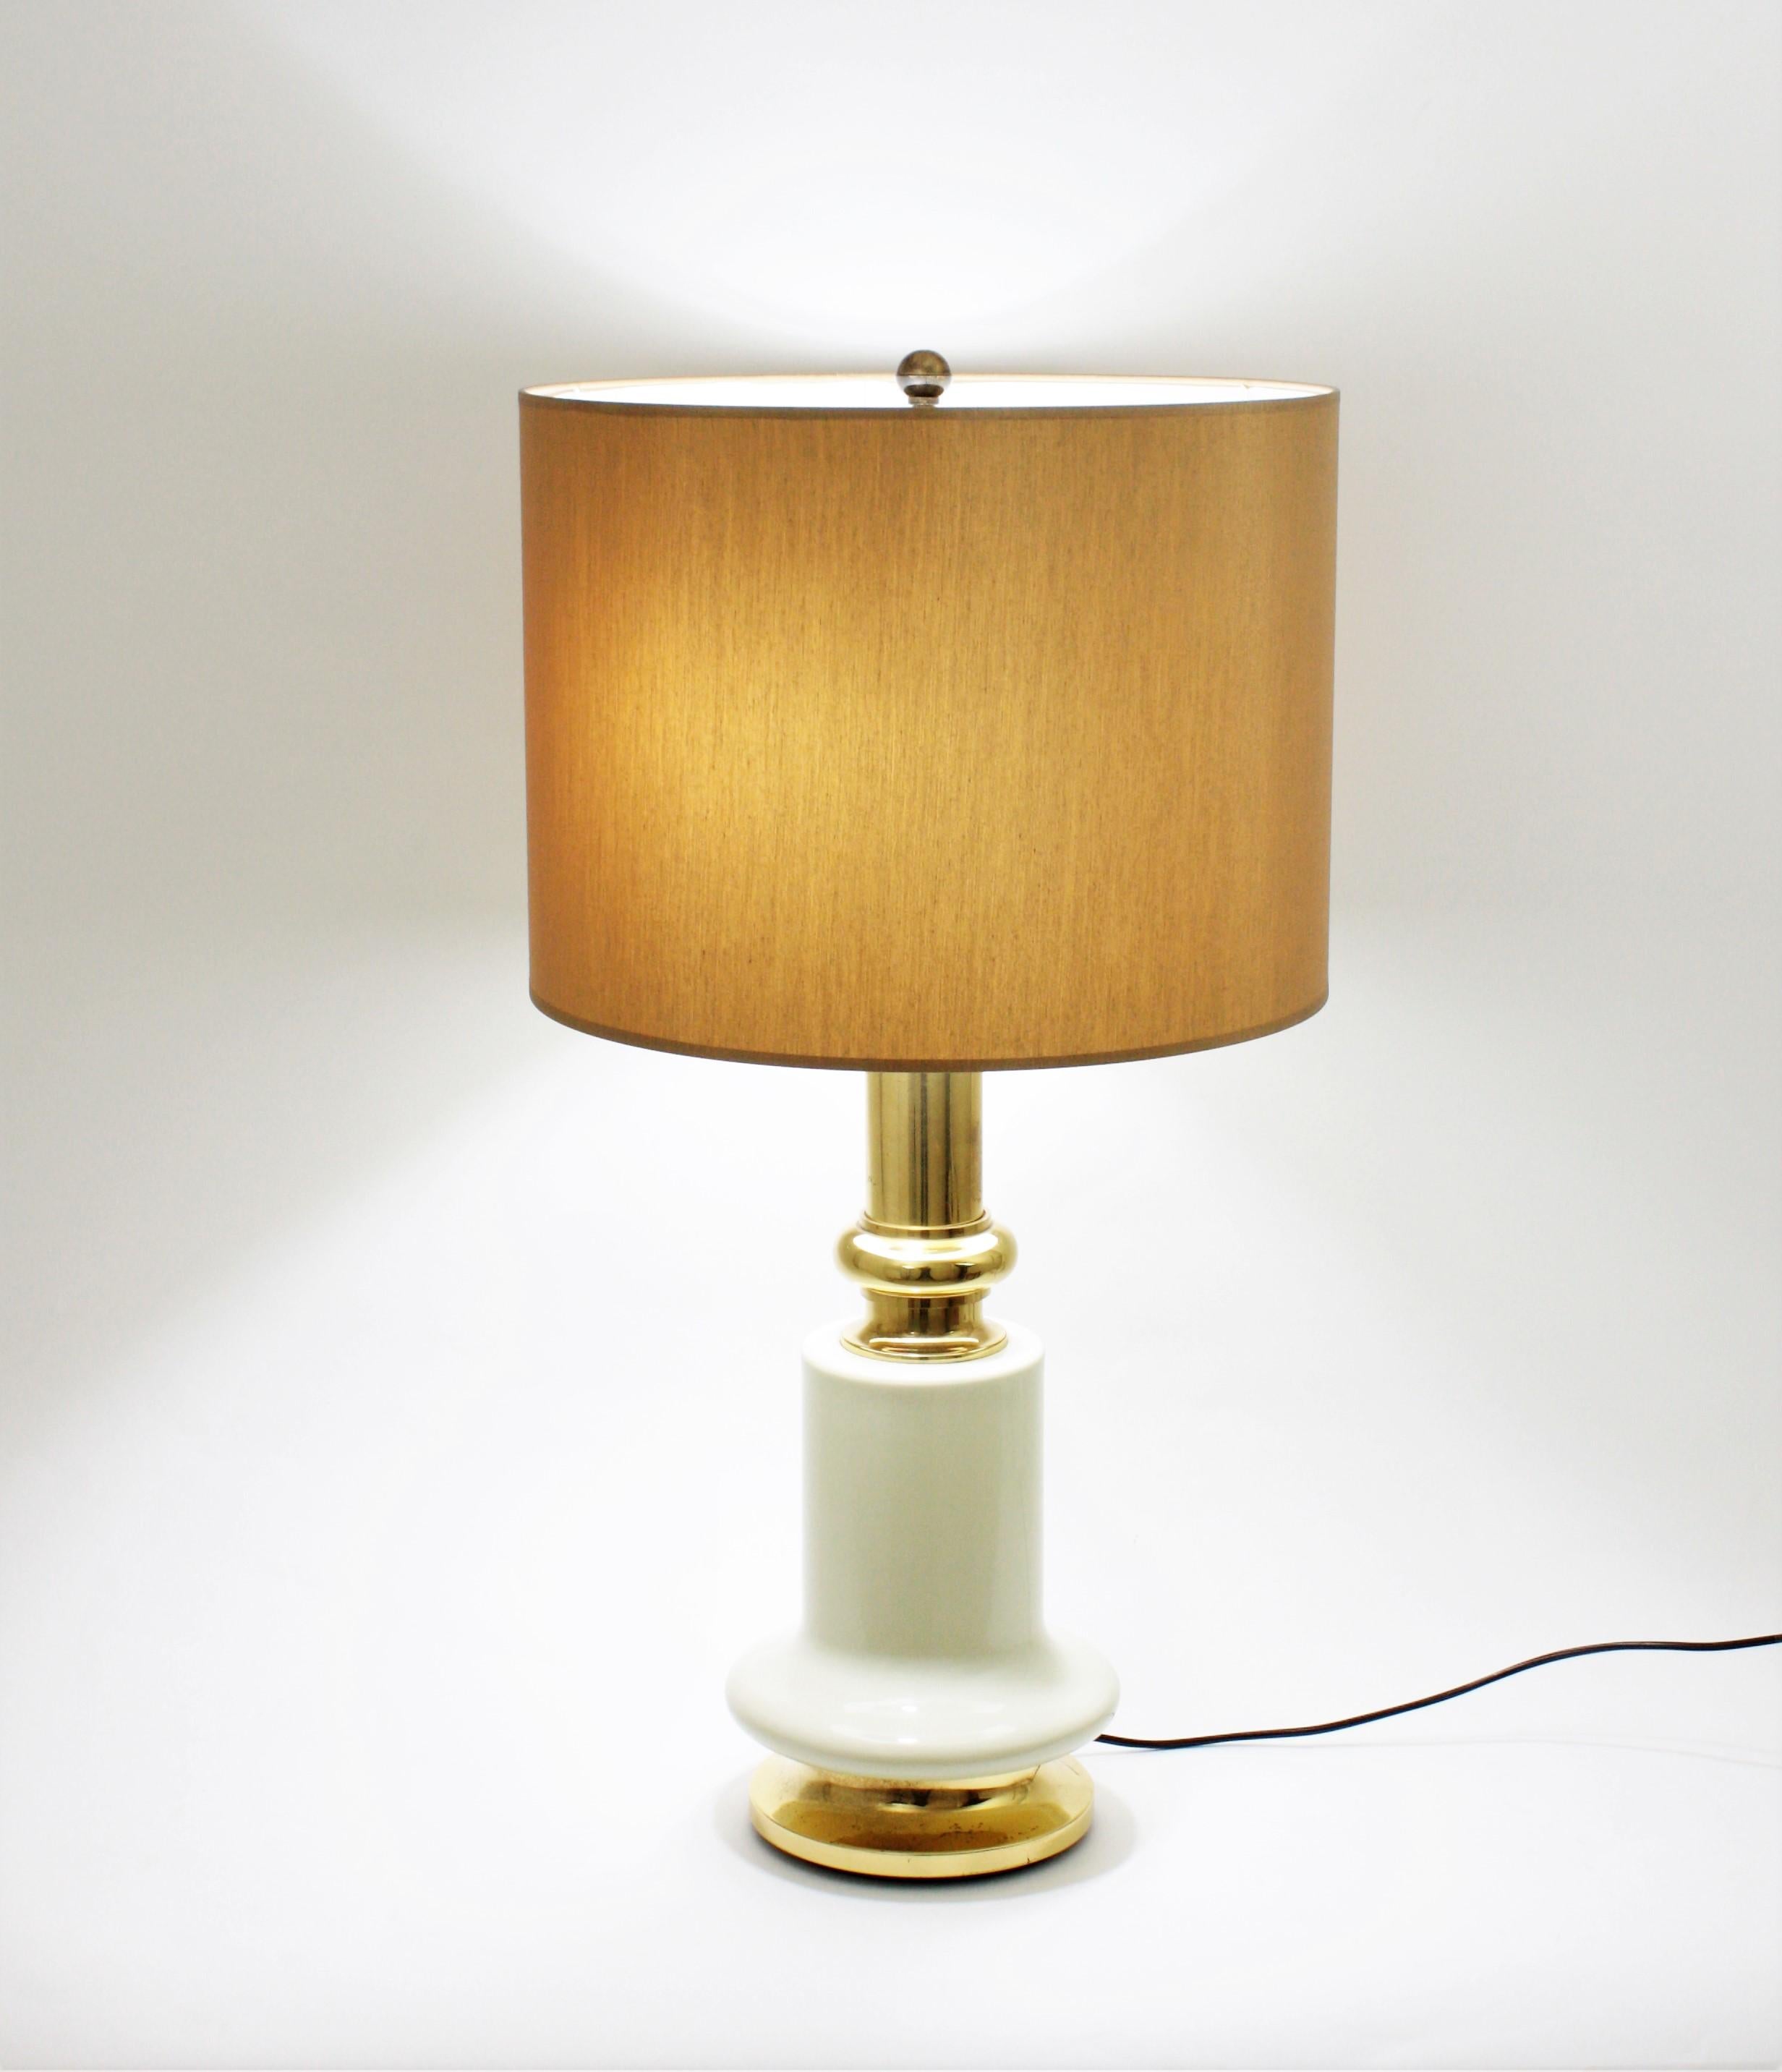 Beautiful polished brass and ivory lacquer Midcentury table lamp. Spain, 1960-1970.
This two-light table lamp combines polished brass at the bottom of the base and at the top with a central part lacquered in ivory color.
This lamp would be a good